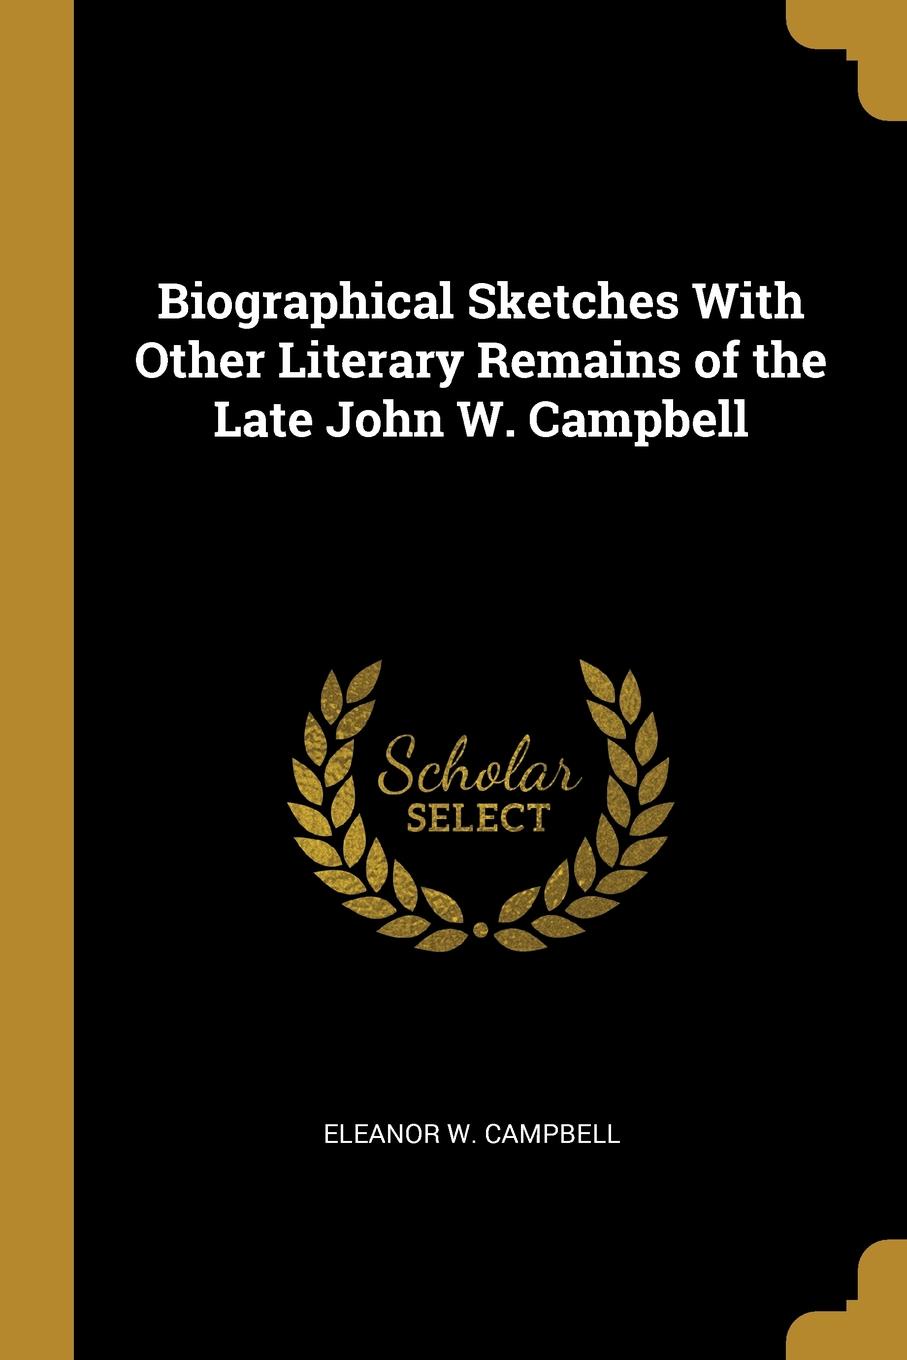 Biographical Sketches With Other Literary Remains of the Late John W. Campbell